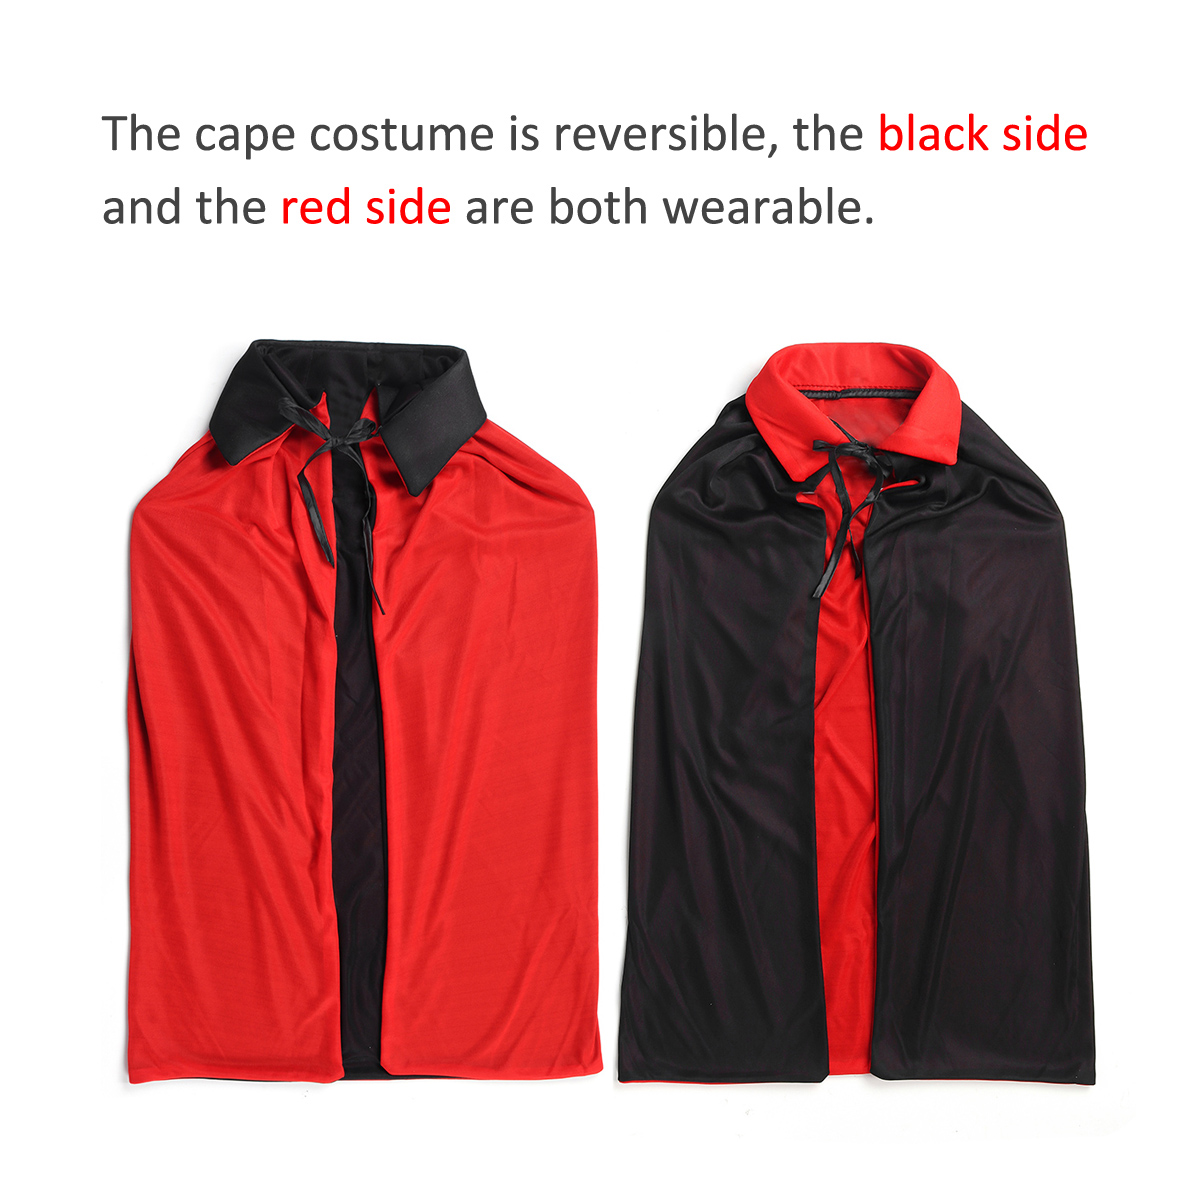 Halloween-Cape-Red-And-Black-Double-sided-Hooded-Childrens-Adult-Party-Dress-Up-Cape-1747148-2